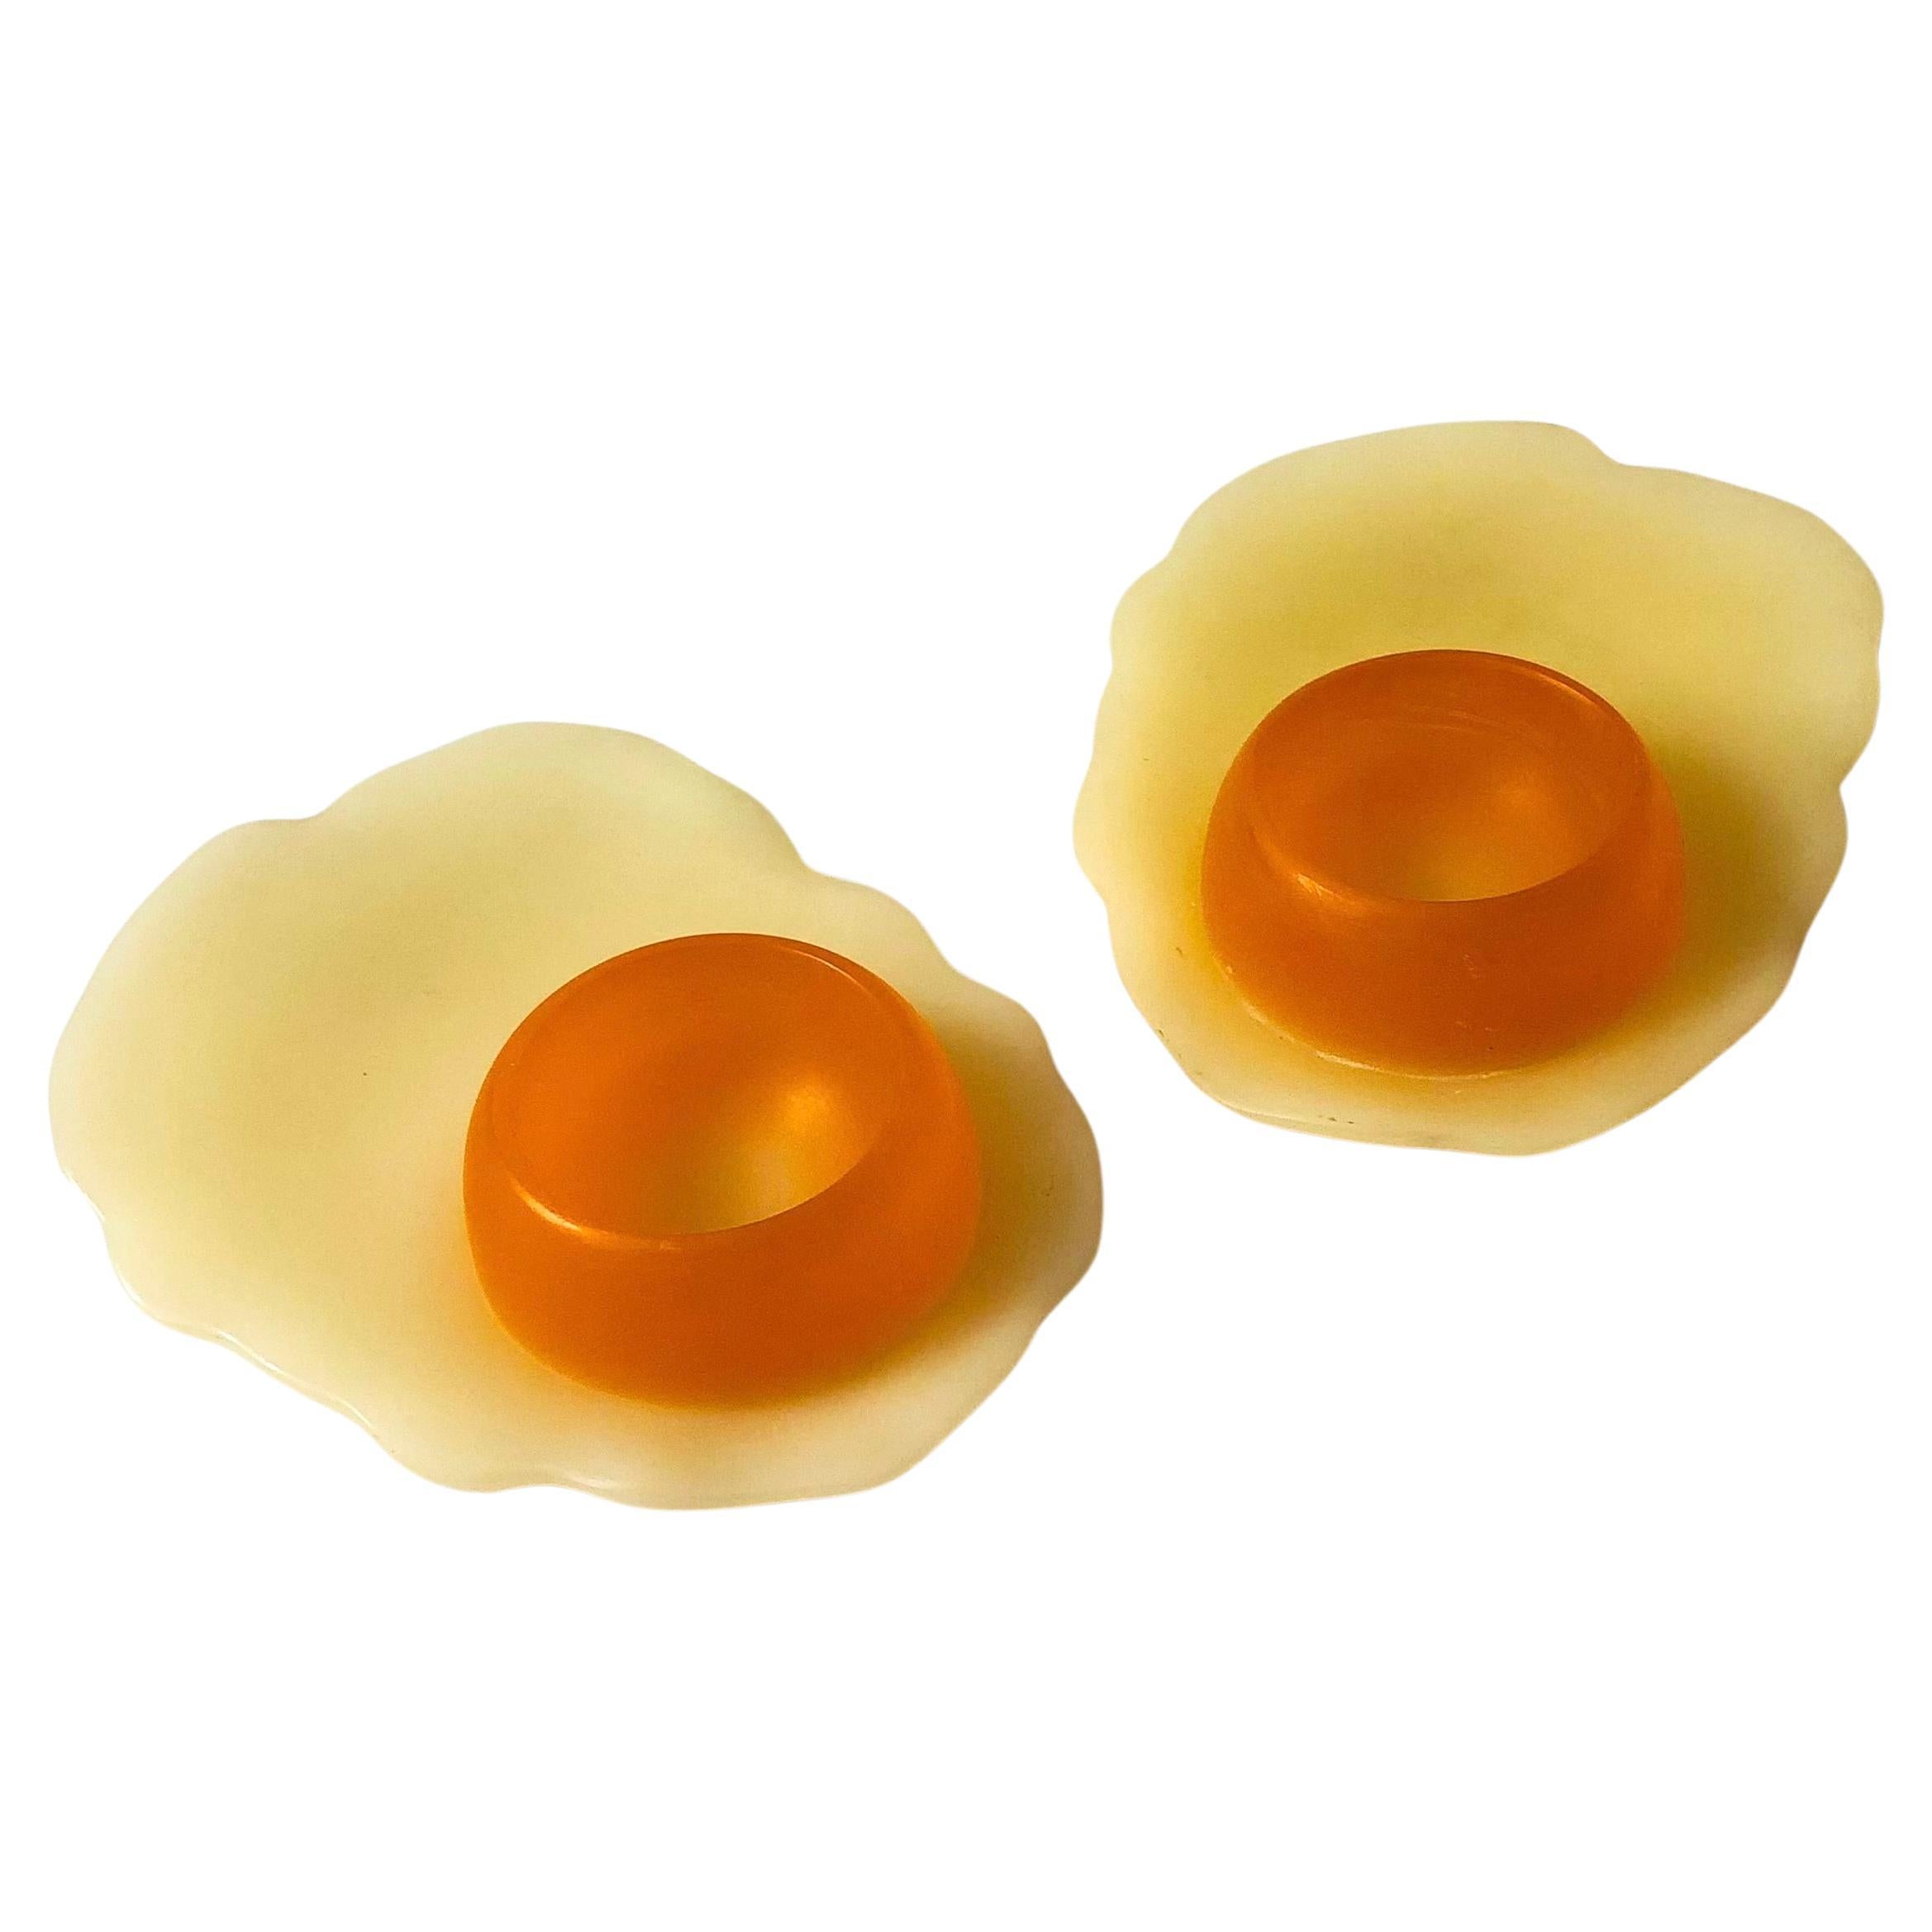 Resin Fried Egg Shaped Egg Cups or Candle Holders - Set of 2